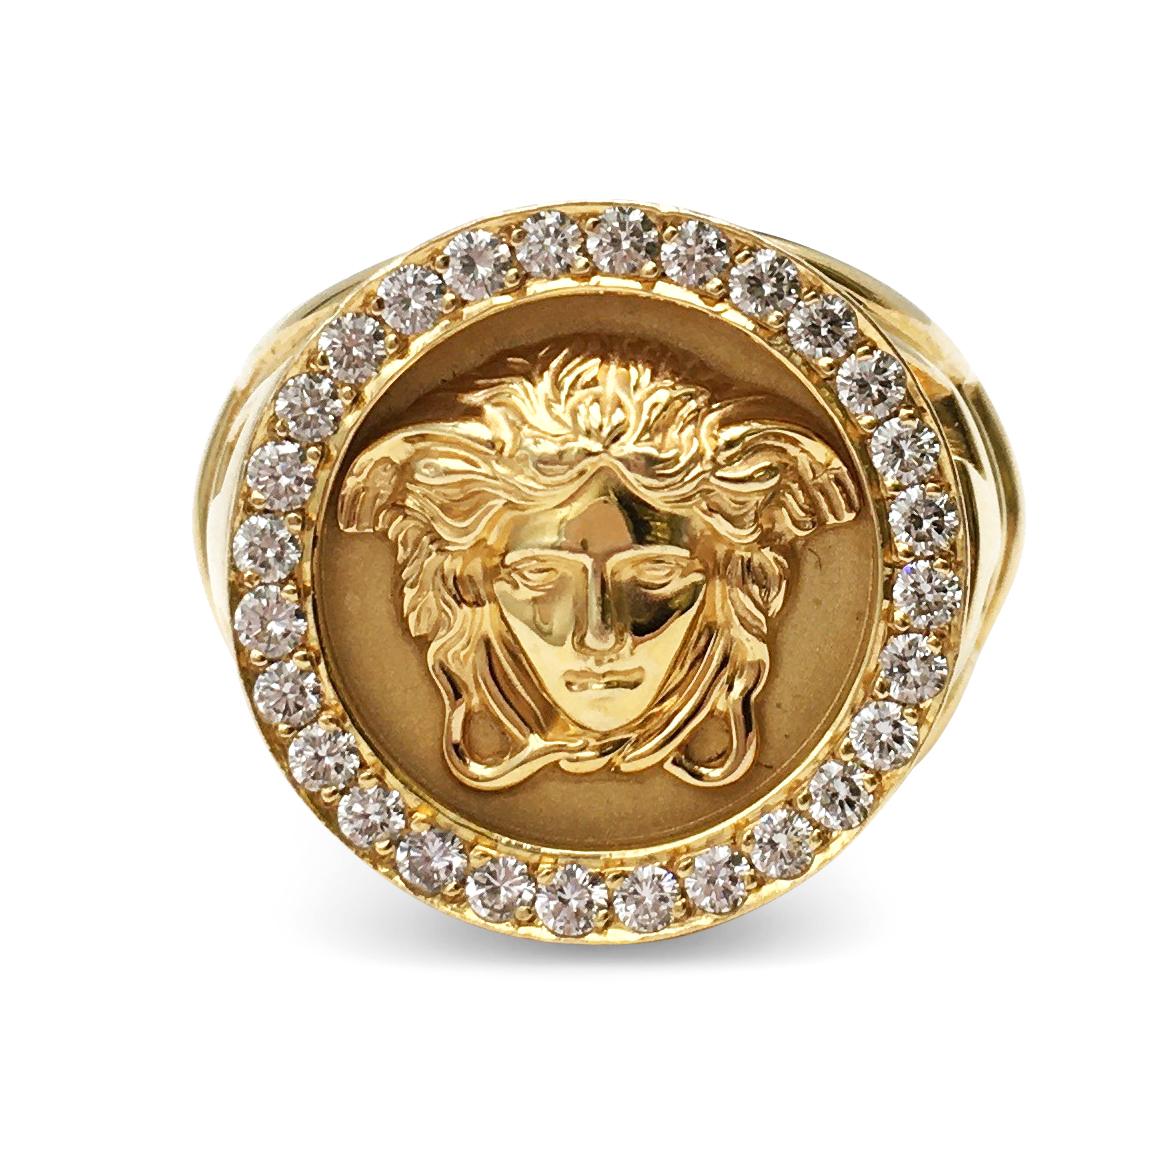 Gianni Versace Gold Ring - 3 For Sale on 1stDibs | versace gold ring 18k, versace  gold ring 18k price, 18k versace ring